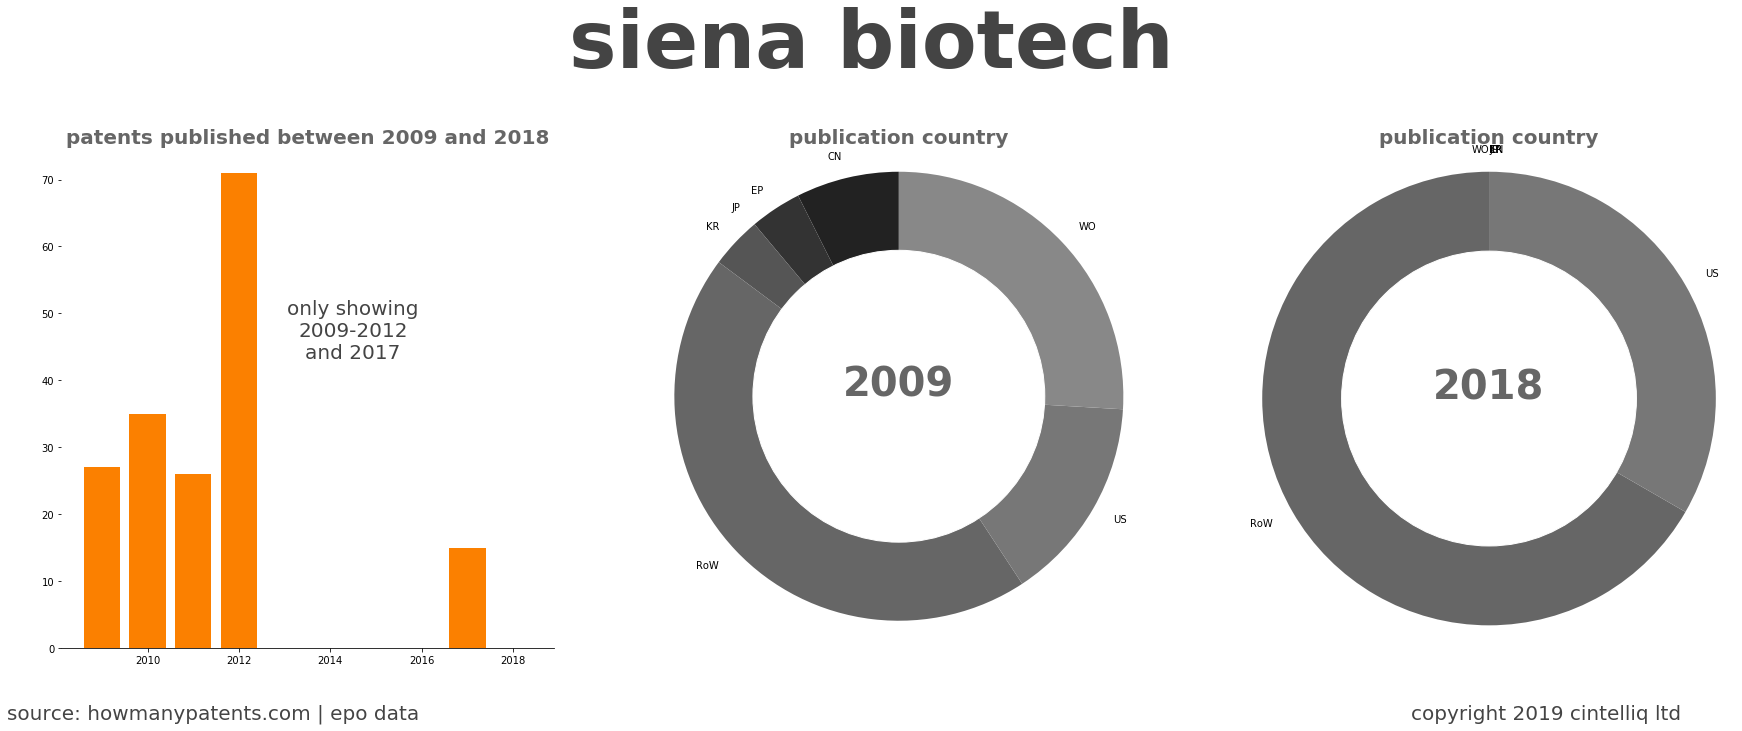 summary of patents for Siena Biotech